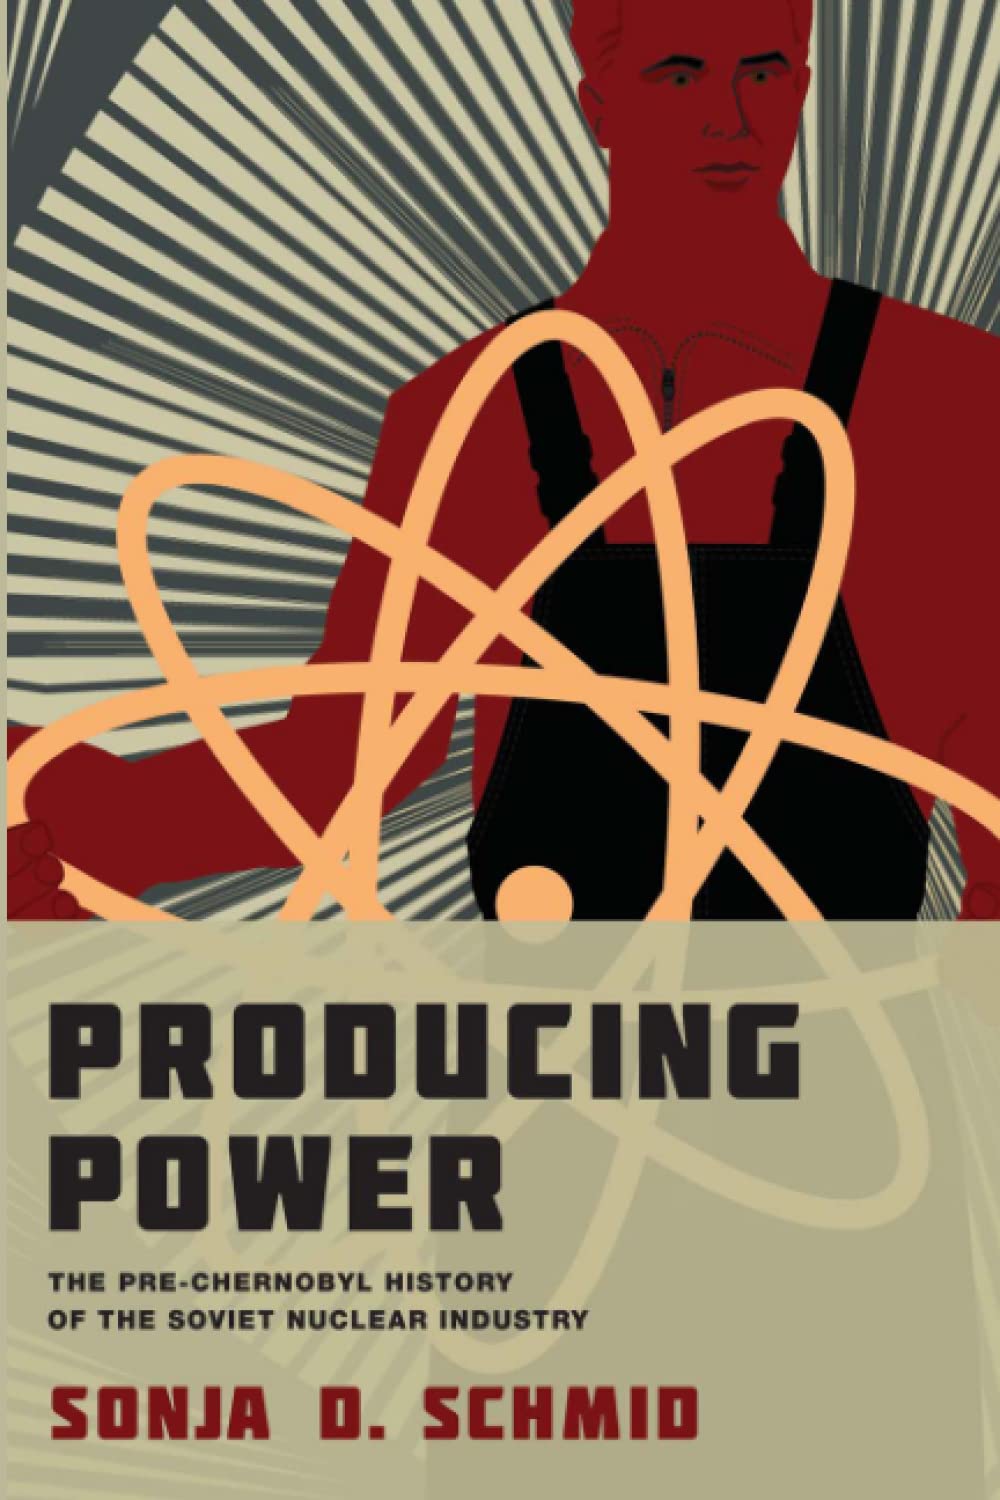 Produces power